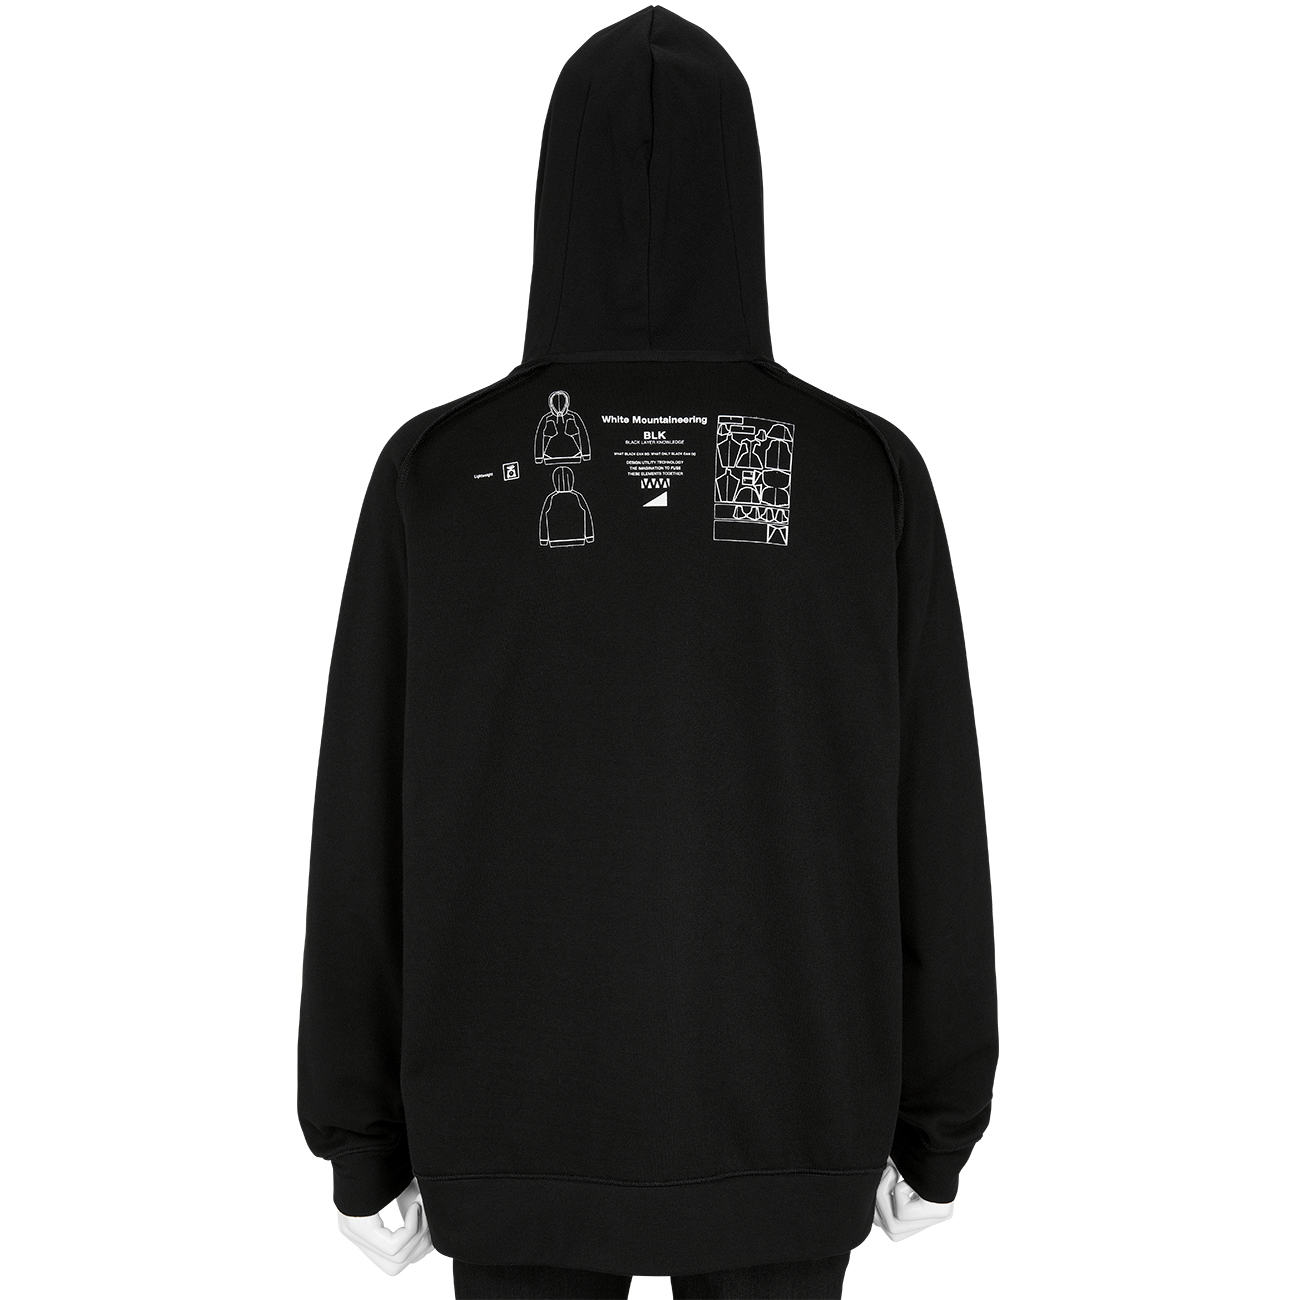 WHITE MOUNTAINEERING BLK (ホワイトマウンテニアリング ビーエルケー) - CONTRASTED HOODIE BLACKの詳細画像4